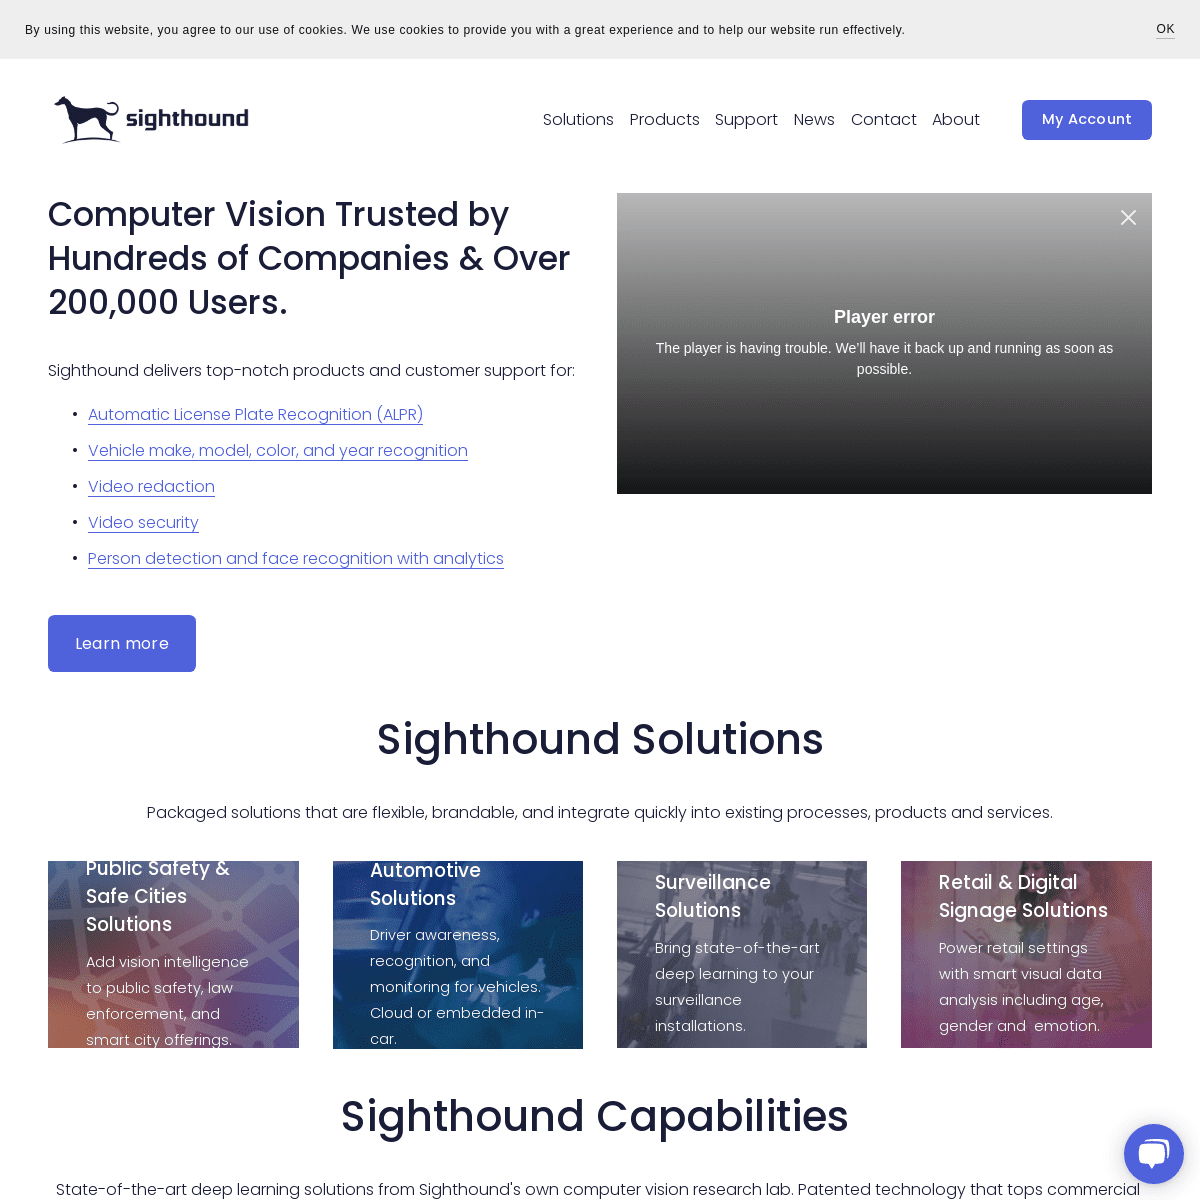 A complete backup of https://sighthound.com